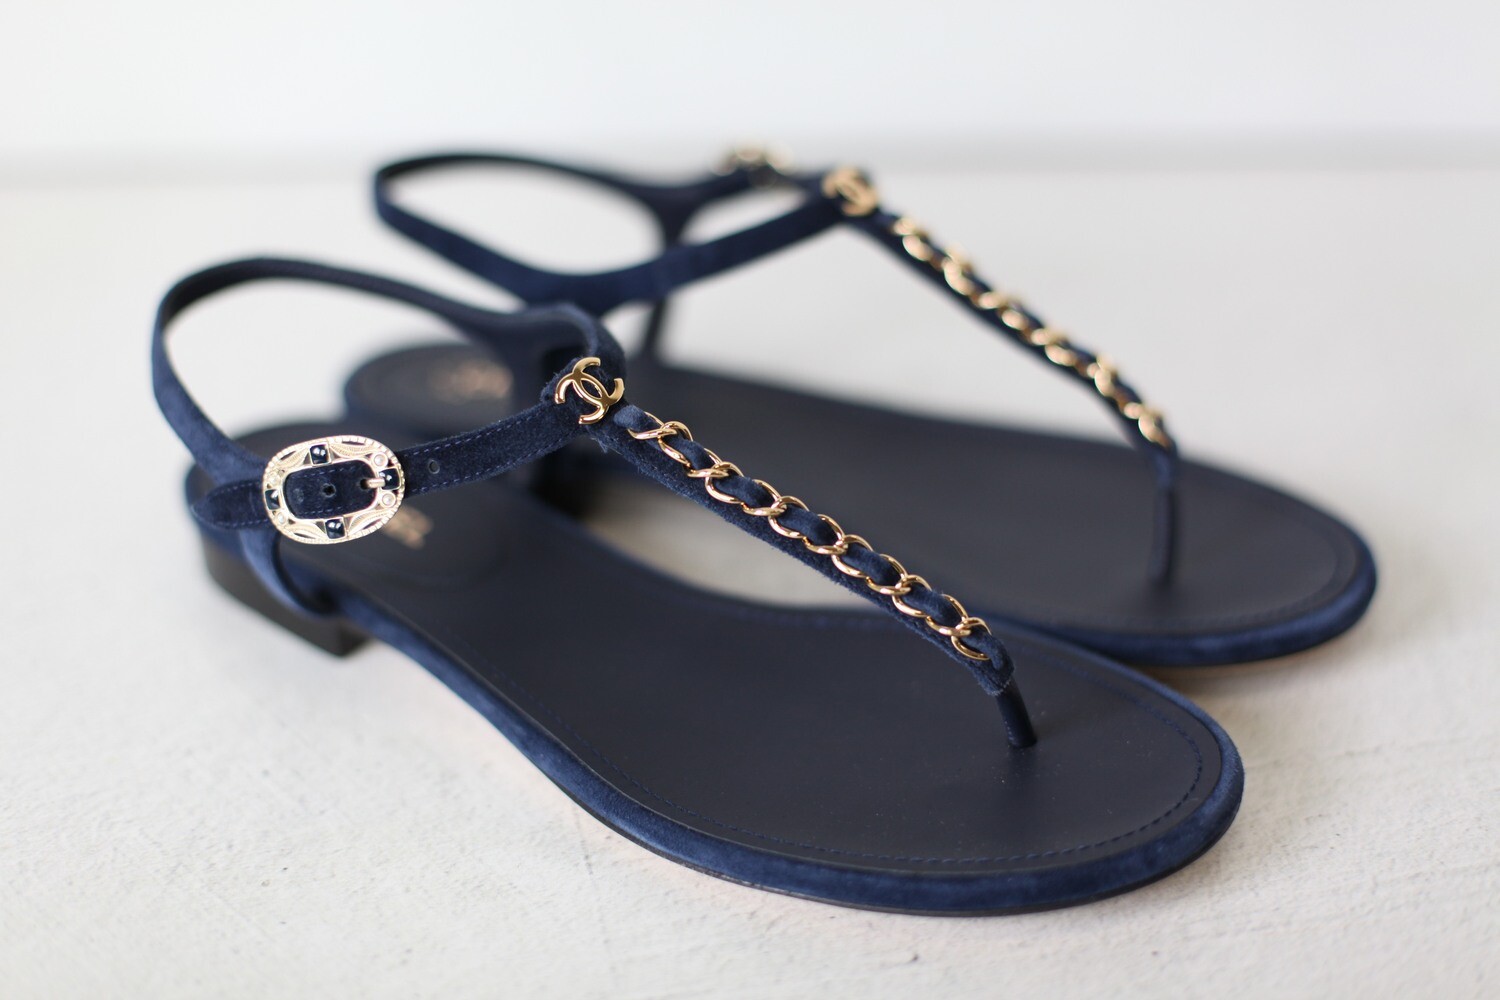 Chanel Thong Navy Suede Chain Sandals, Size 39, New In Dustbag, WA001